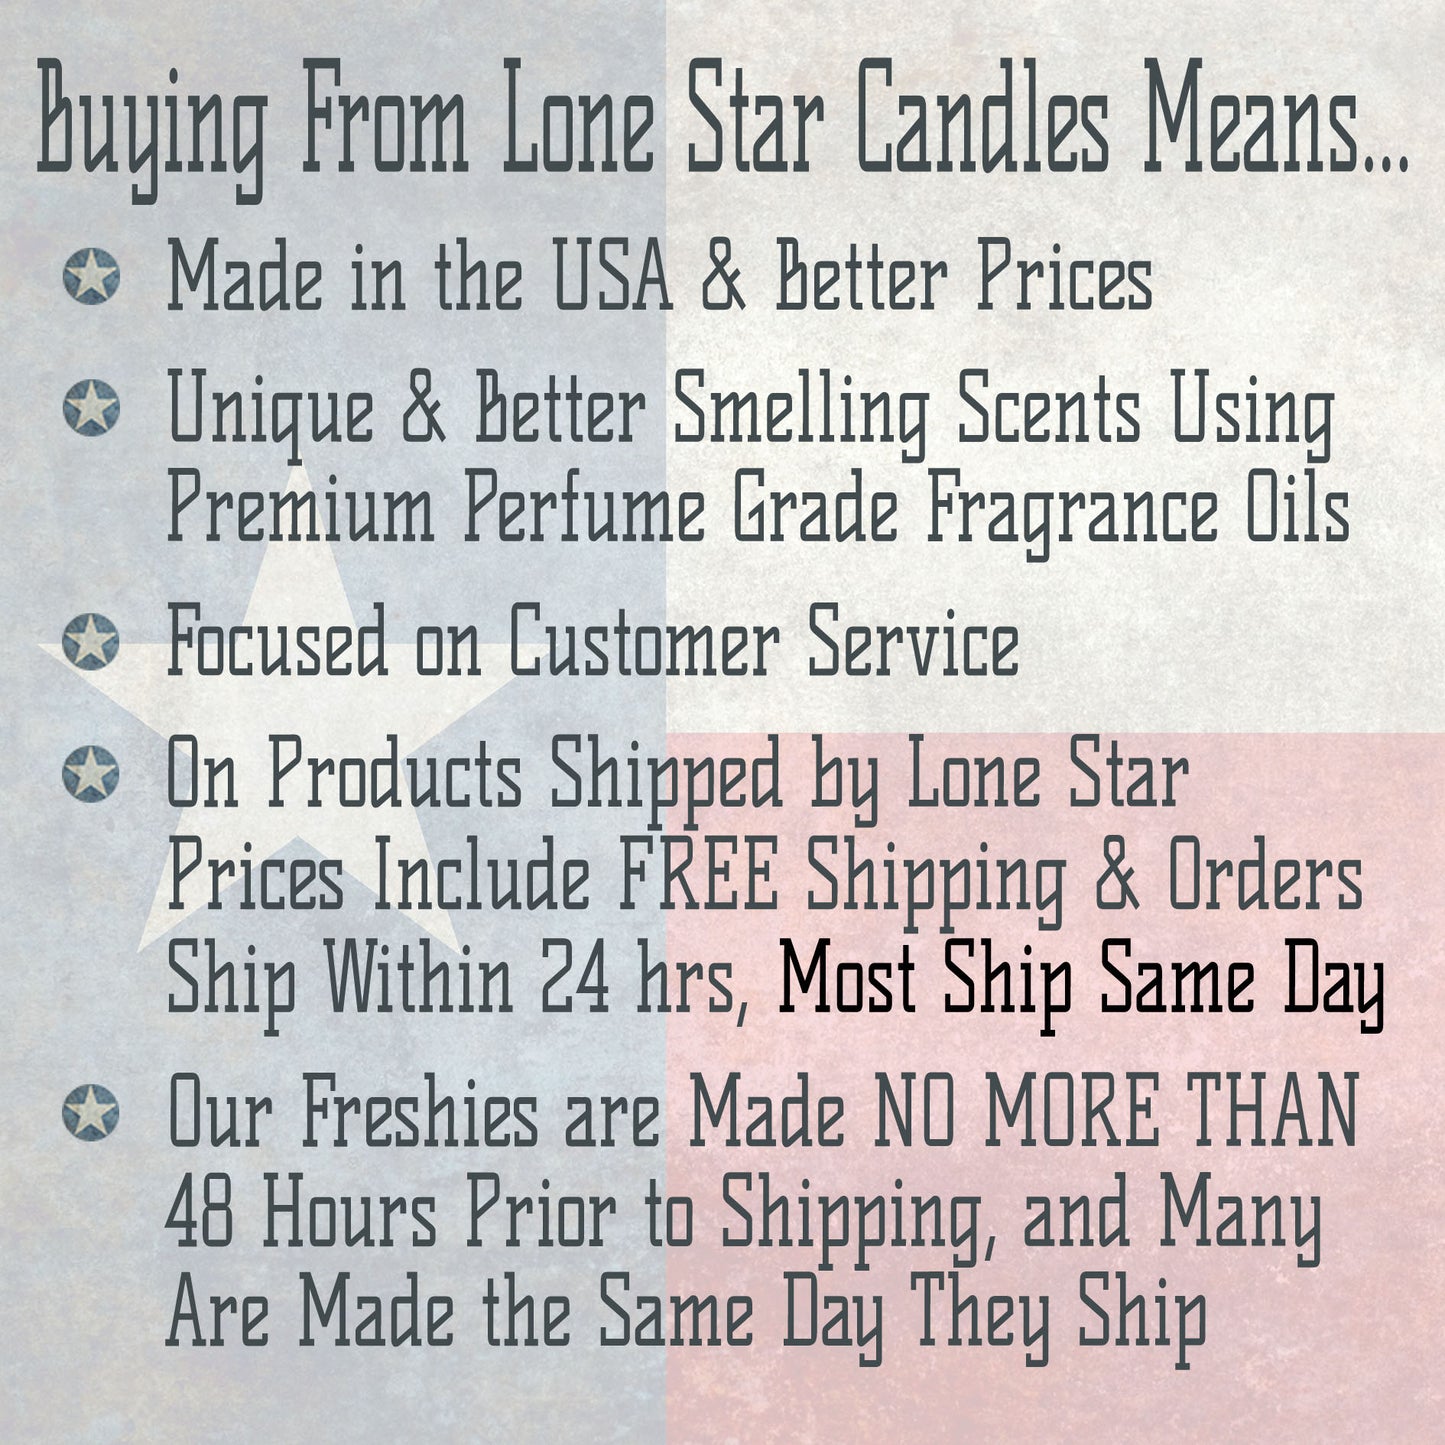 Cranberries & Sandalwood, Lone Star Candles & More's Premium Strongly Scented Freshies, A Delightful Mix of Spiced Cranberry, & Sandalwood, Car & Air Freshener, USA Made in Texas, High Heel 1-Pack